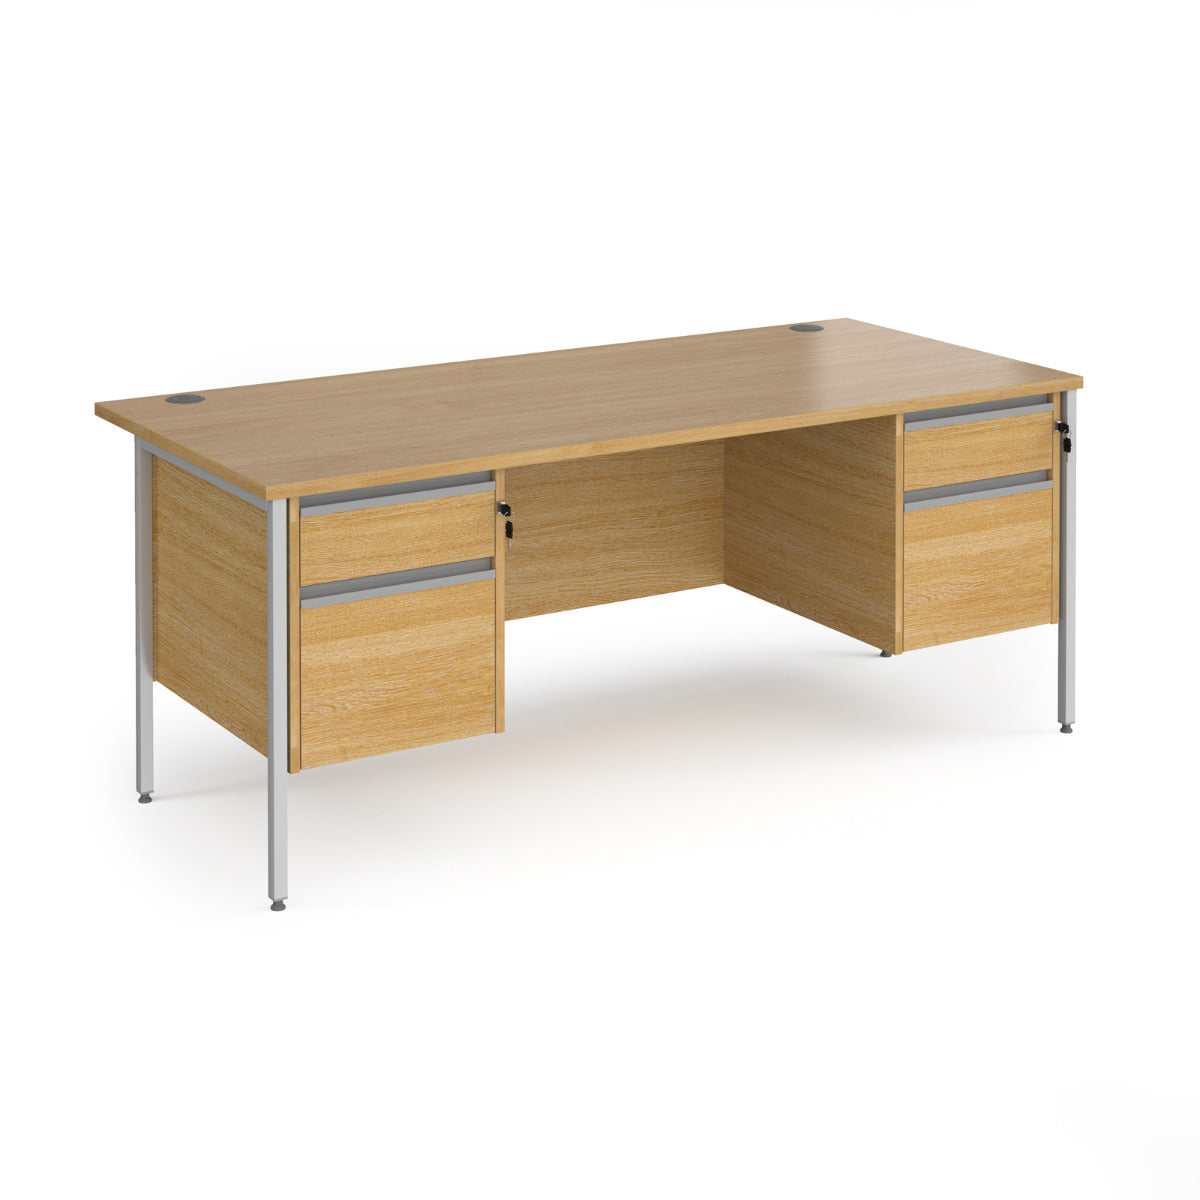 Contract H Frame Straight Office Desk with Two & Two Drawer Storage